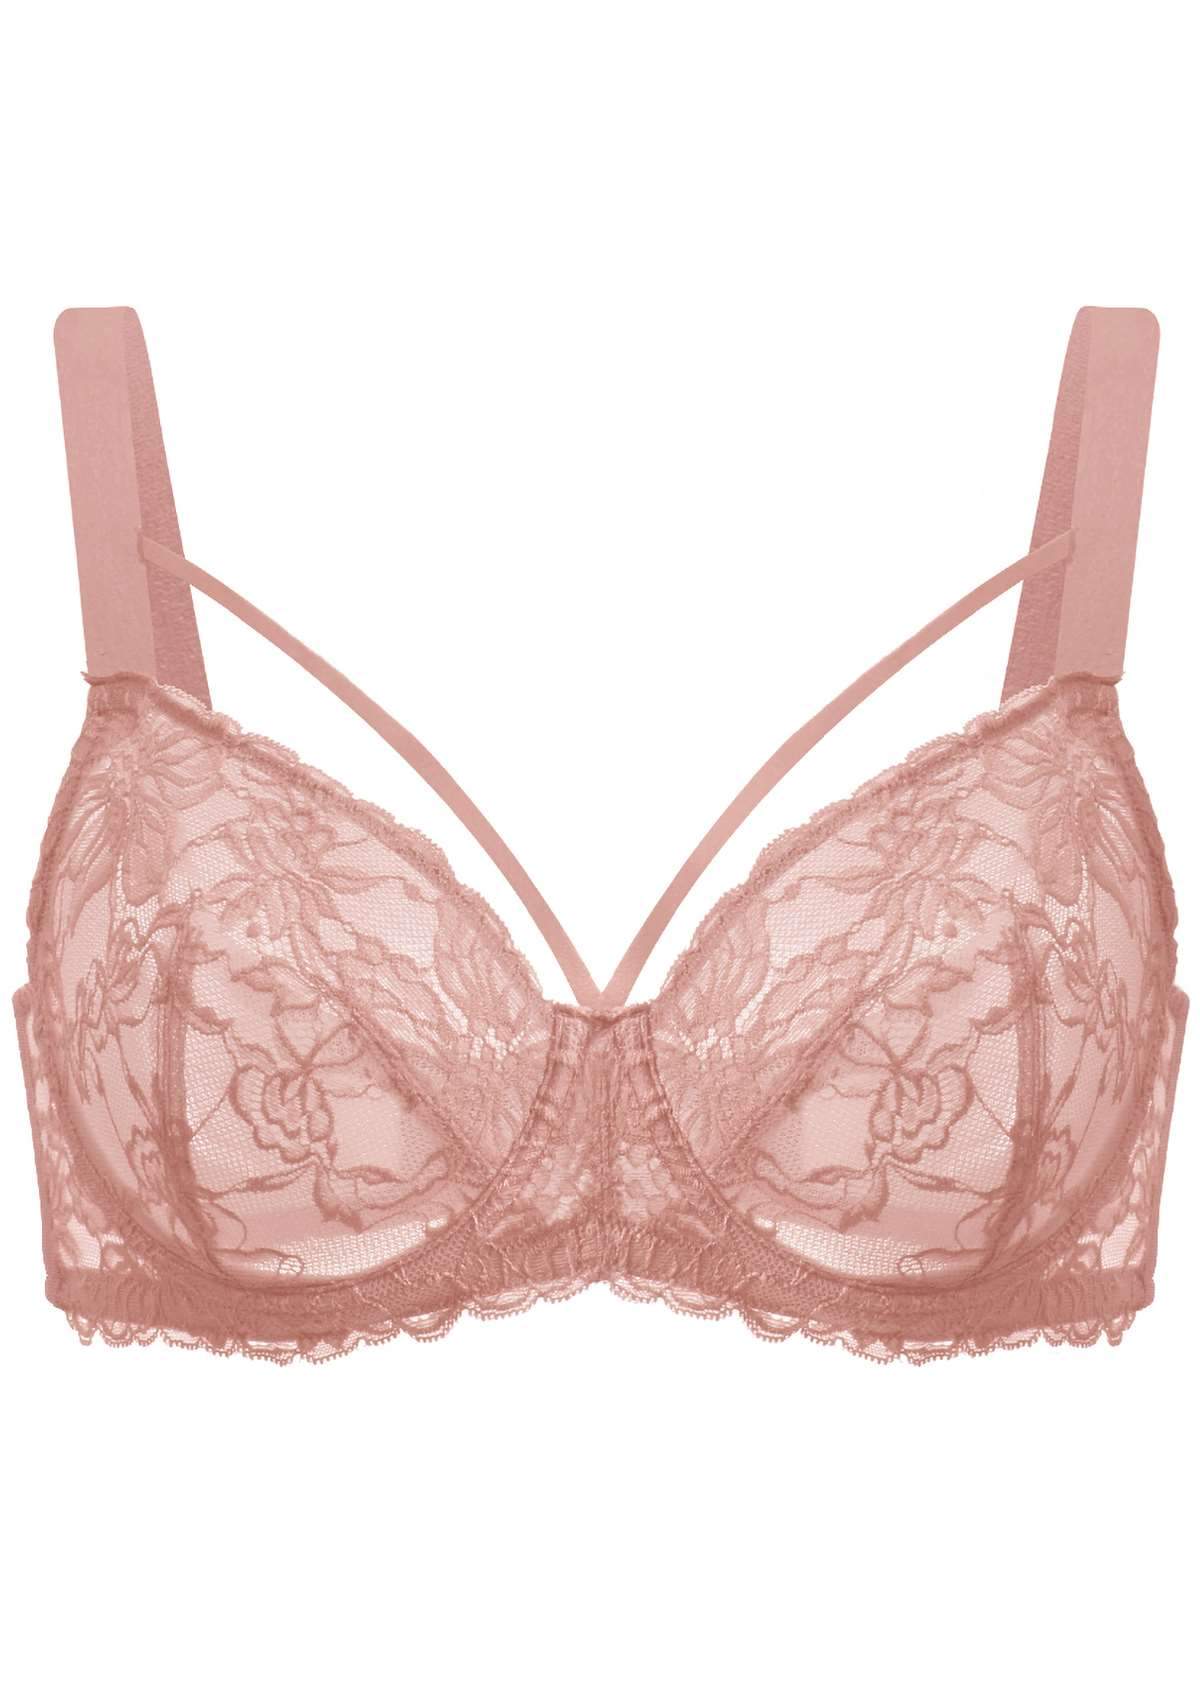 HSIA Pretty In Petals Lace Bra And Panty Sets: Bra For Big Boobs - Light Coral / 38 / D